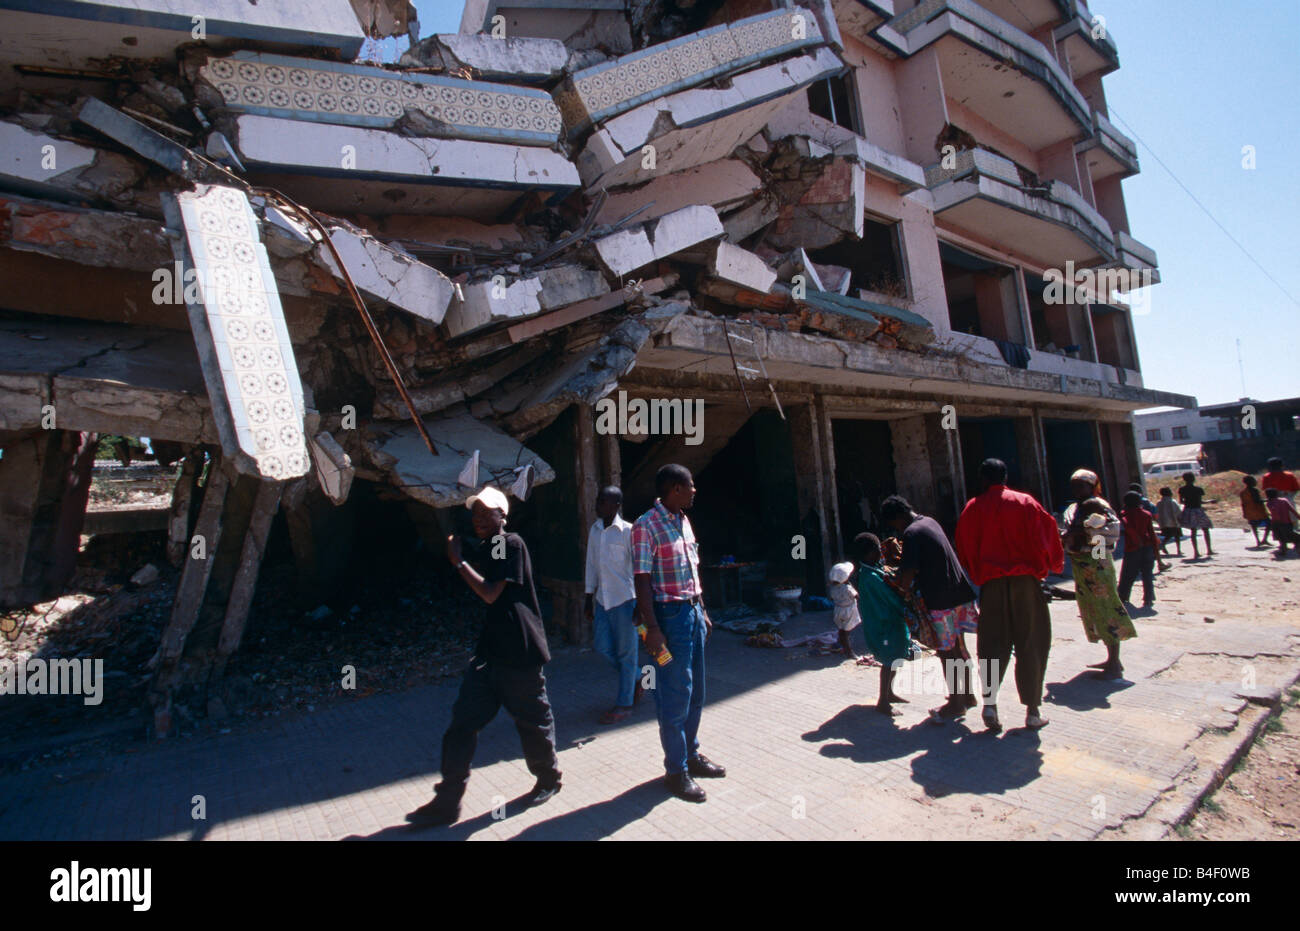 People displaced by war standing by tumbling building in war-torn Angola Stock Photo